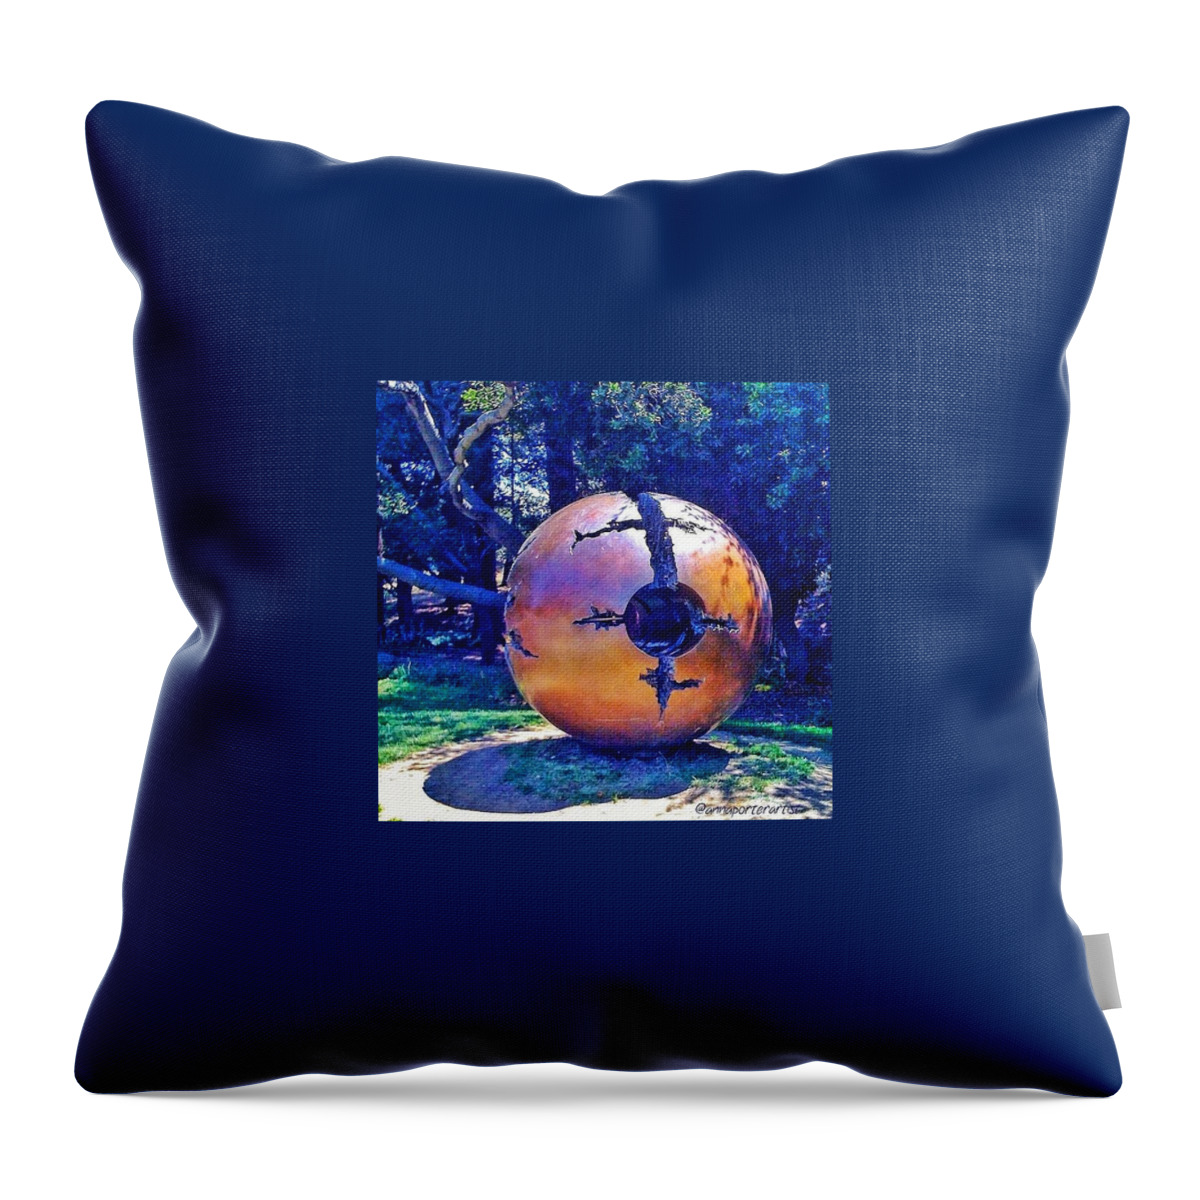 Nothingisordinary_ Throw Pillow featuring the photograph Uc Berkeley Orb For The by Anna Porter